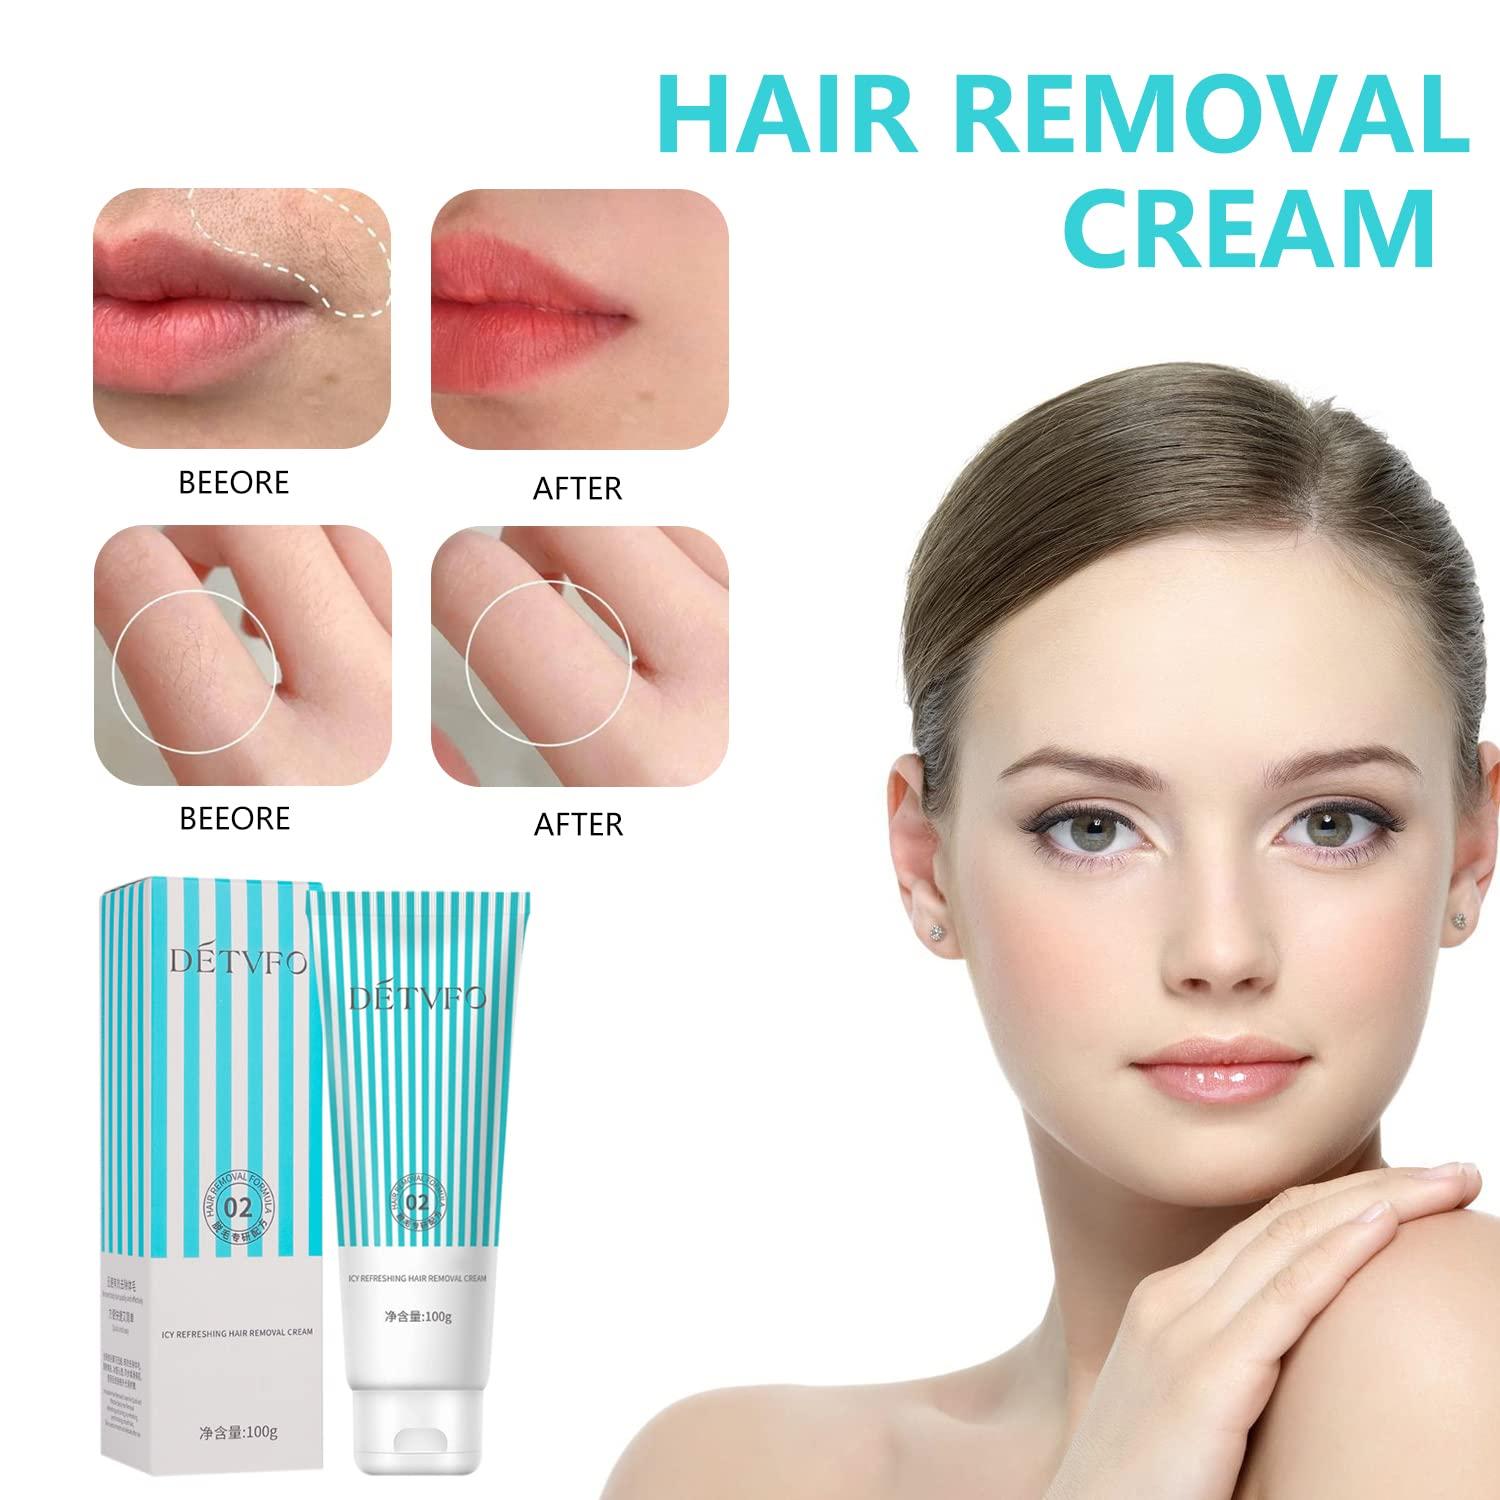 Hair Removal, Grooming & Skin Care Products